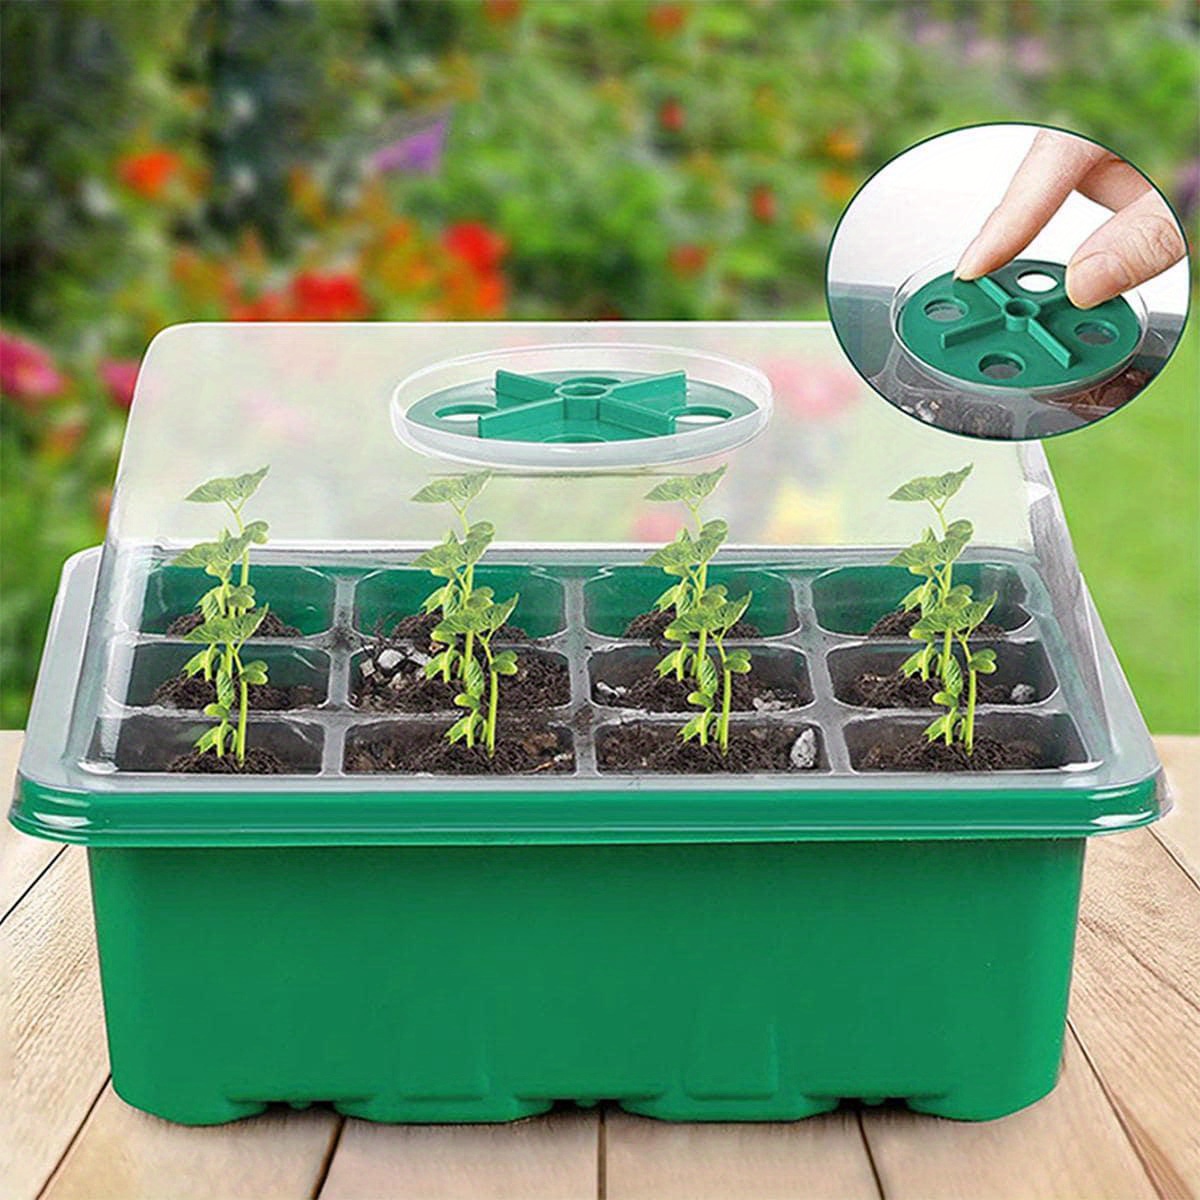 Vego Garden  Seedling Tray Lids with Drip Irrigation